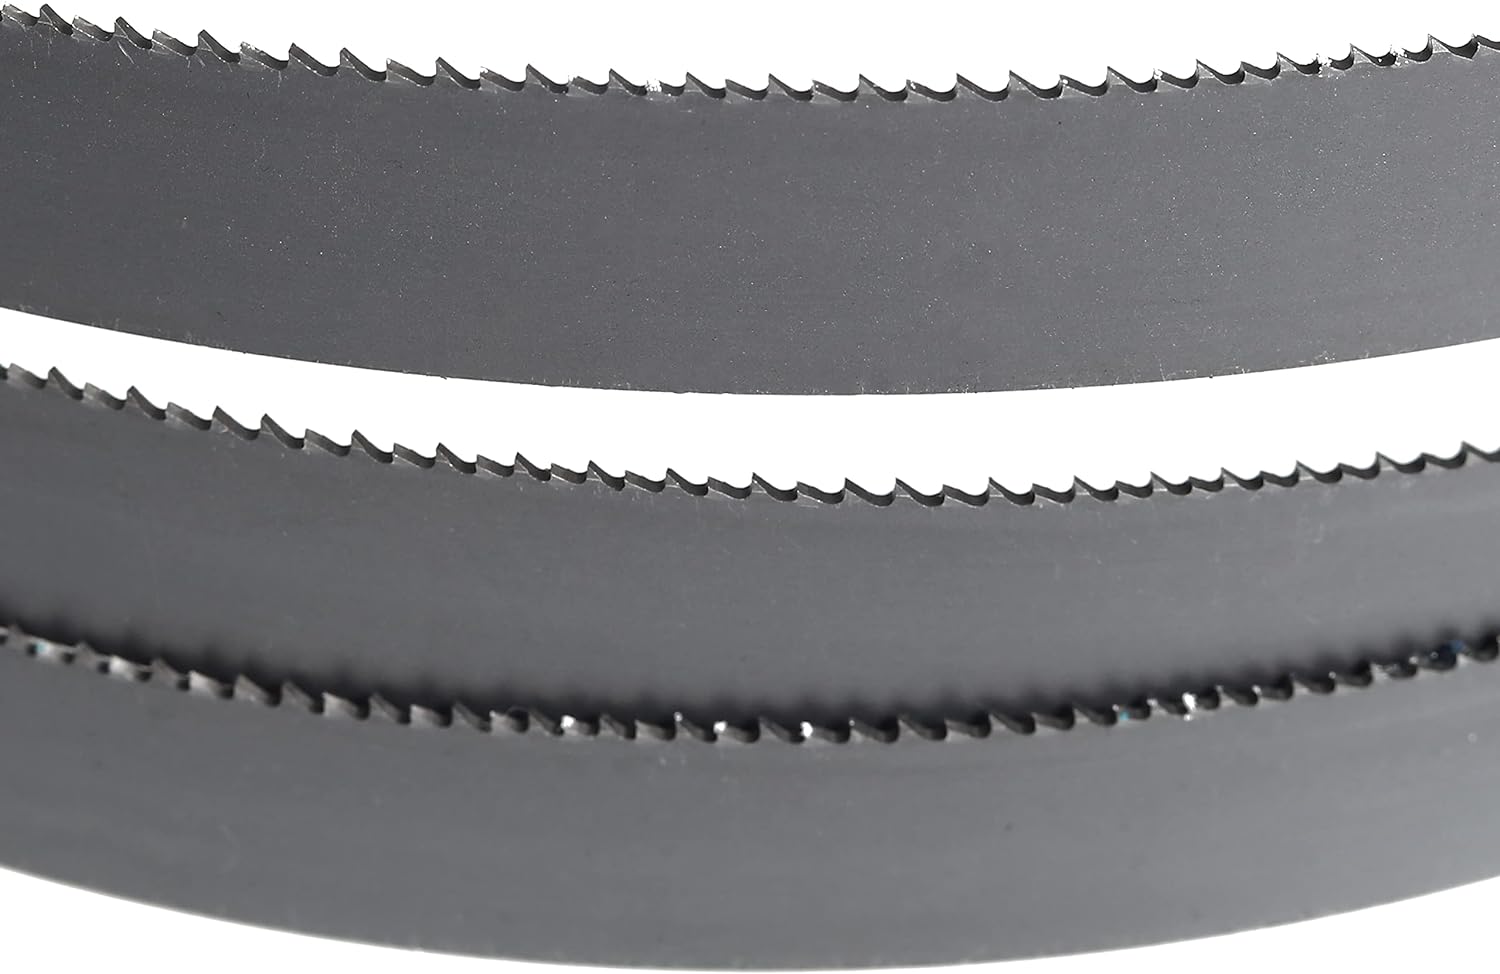 Imachinist S621224 Bi-Metal 62" Long, 1/2" Wide, 0.025" Thick, Bandsaw Blades for Cutting Soft Ferrous Metal (24TPI)